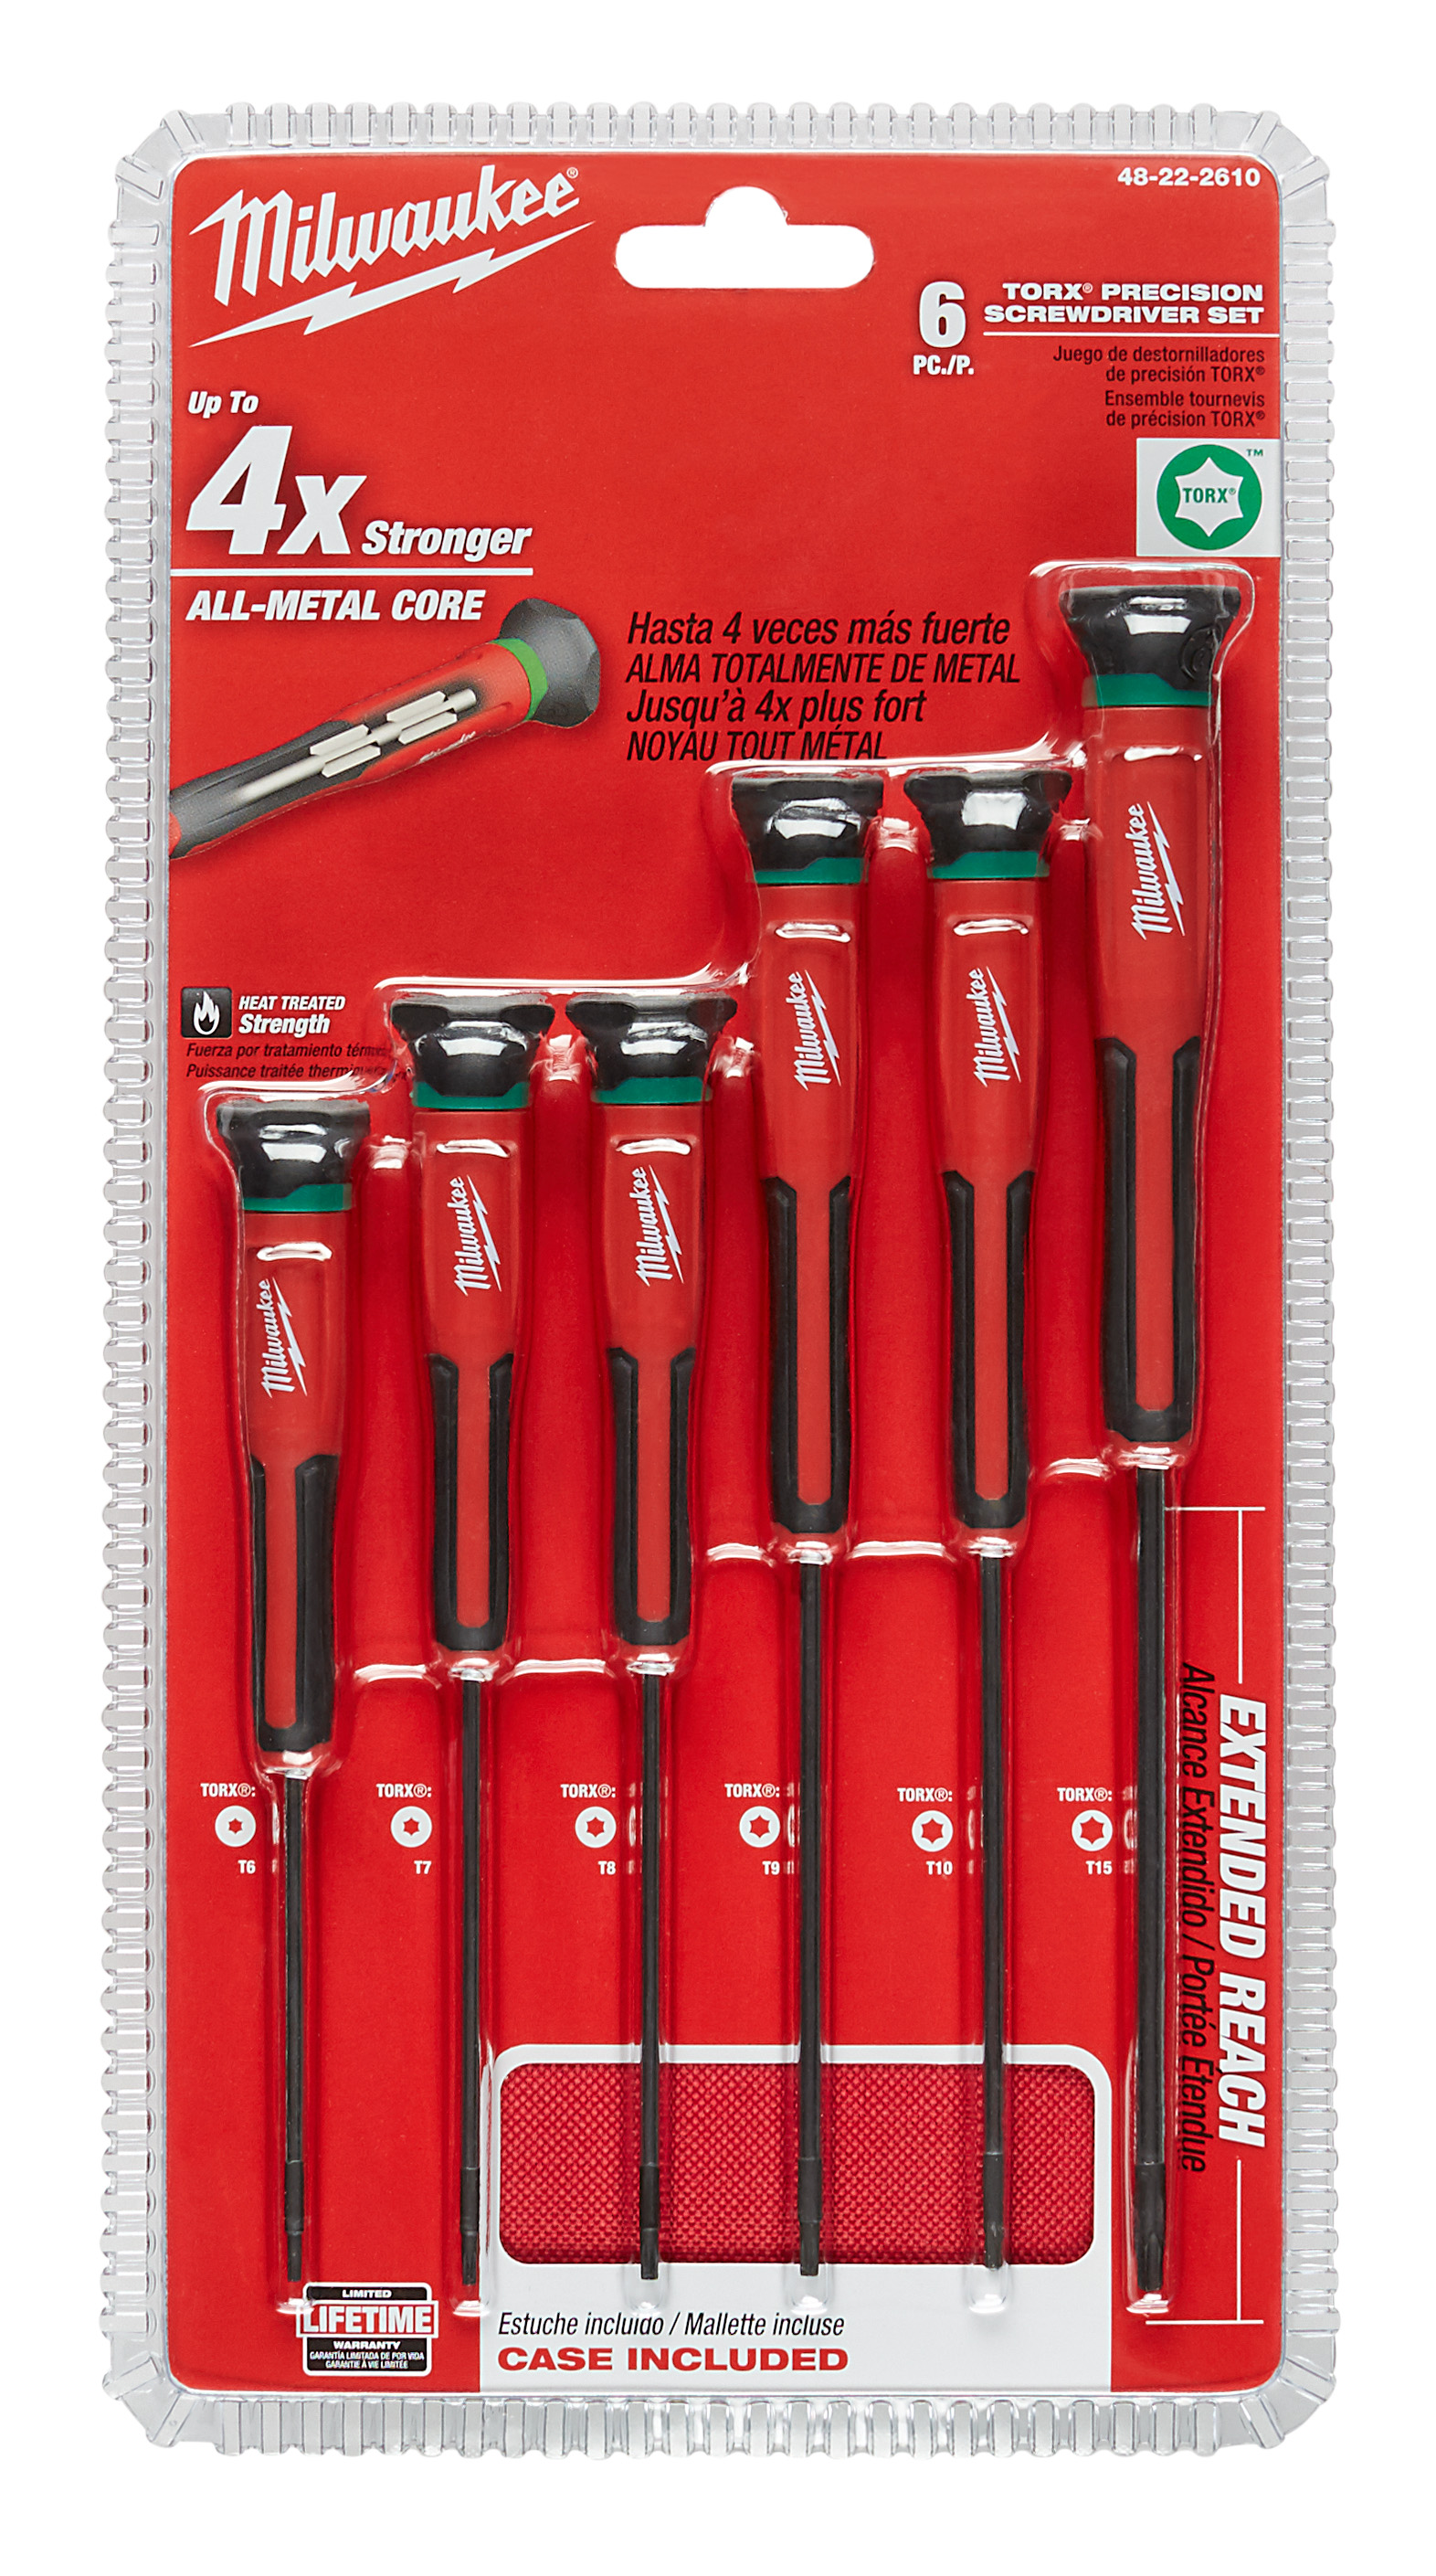 48-22-2610 045242338115 Milwaukee precision screwdrivers feature and all-metal core for up to 4X strength. Precision machined tips provide secure fitments and long life. The extended reach design and longer shanks deliver improved visibility and reach. 360-degree rotating back caps offer greater control, driving ability, and tuning. Additionally, color coded markings allow users to easily ID tools on the jobsite. Chrome plated shanks increase tool life by reducing corrosion and providing superior rust protection.